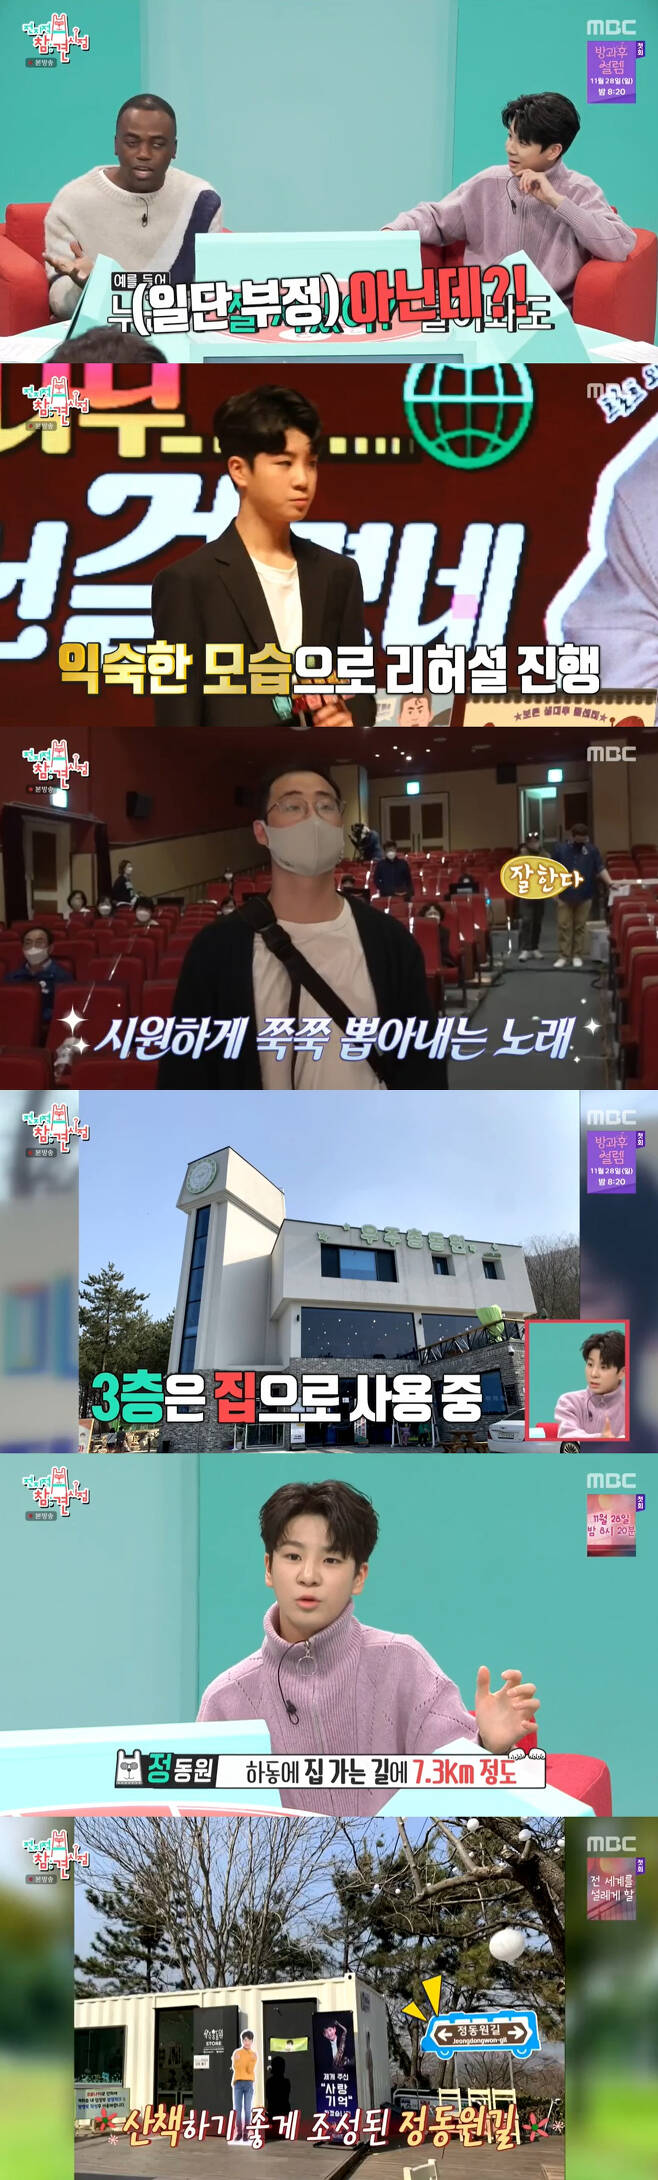 Point of Omniscient Interfere singer Jung Dong-won has released a Seoul house where Manager lives together.Jung Dong-won appeared on MBC entertainment program Point of Omniscient Interfere broadcasted on the 20th.Jung Dong-won, who appeared in the studio, said, When I was Mr. Trot, it was 148cm, but it was up to 167cm.Also, about the standard of sharing my brother and uncle, he said, I go as I feel when I do not think about my age.The daily life of Jung Dong-won, which was released afterwards, showed him living a soul life with Manager.The Manager of Jung Dong-won said, (Jung Dong-won) Gyeongnam is the main house, but I came to Seoul because of the schedule.I have been living together for a year because I need a guardian. I think I am the busiest 15 years in my country. Their house attracted attention as a spacious space from the long corridor to the living room.Manager woke Jung Dong-won as he prepared breakfast; while eating together, he nagged, saying, Eat evenly.Jung Dong-won said, He said 80 percent is hereditary. He said its up to 180 centimeters tall. He also said, Why do you do this to your beard?and asked Manager and his real brother Chemi to laugh.Jung Dong-won said: I honestly dont study well, Im not trying to, I just kept doing the same thing for a month and I couldnt remember.I envy the kids who are good at studying. Manager said, You are persistent about what you are interested in.The children will envy you to sing well, he said, and told them to take an online class.After taking classes and playing games with Manager, Jung Dong-won pulled out his saxophone and caught his eye.Jung Dong-won was very attracted attention by showing high-quality saxophone skills. Jung Dong-won said, I lived in the country and did not have a school.I will play the song that my grandfather practiced to learn, he said.Yang Se-hyeong asked Jung Dong-won, Do you know that you are a puberty now? Do you know what two bottles mean?I think its a little puberty, I used to wear underwear for Sigi now but I cant, I think Im falling out of style, Jung Dong-won said.Another cast member Jonathan, a peer of Jung Dong-won, said:  (Jung Dong-won) seems to be a puberty.Sigi, who comes up with no in all words, is a puberty. When I ask how are you? I say no. Jung Dong-won arrived at a festival rehearsal venue after getting into a car with Manager and visiting a hair shop.Jung Dong-won showed seriousness to check the condition of MR and Inyer carefully during rehearsal.Jung Dong-won said at the end of the broadcast, I remodeled the house I had bought before, made the first and second floors into a cafe, and made the third floor into a house where my family lives.There was also a Jung Dong-won road, which is 7.3 kilometers long, on the way home. The performers expected Jung Dong-won to play, saying, What will you look like when you are 30?